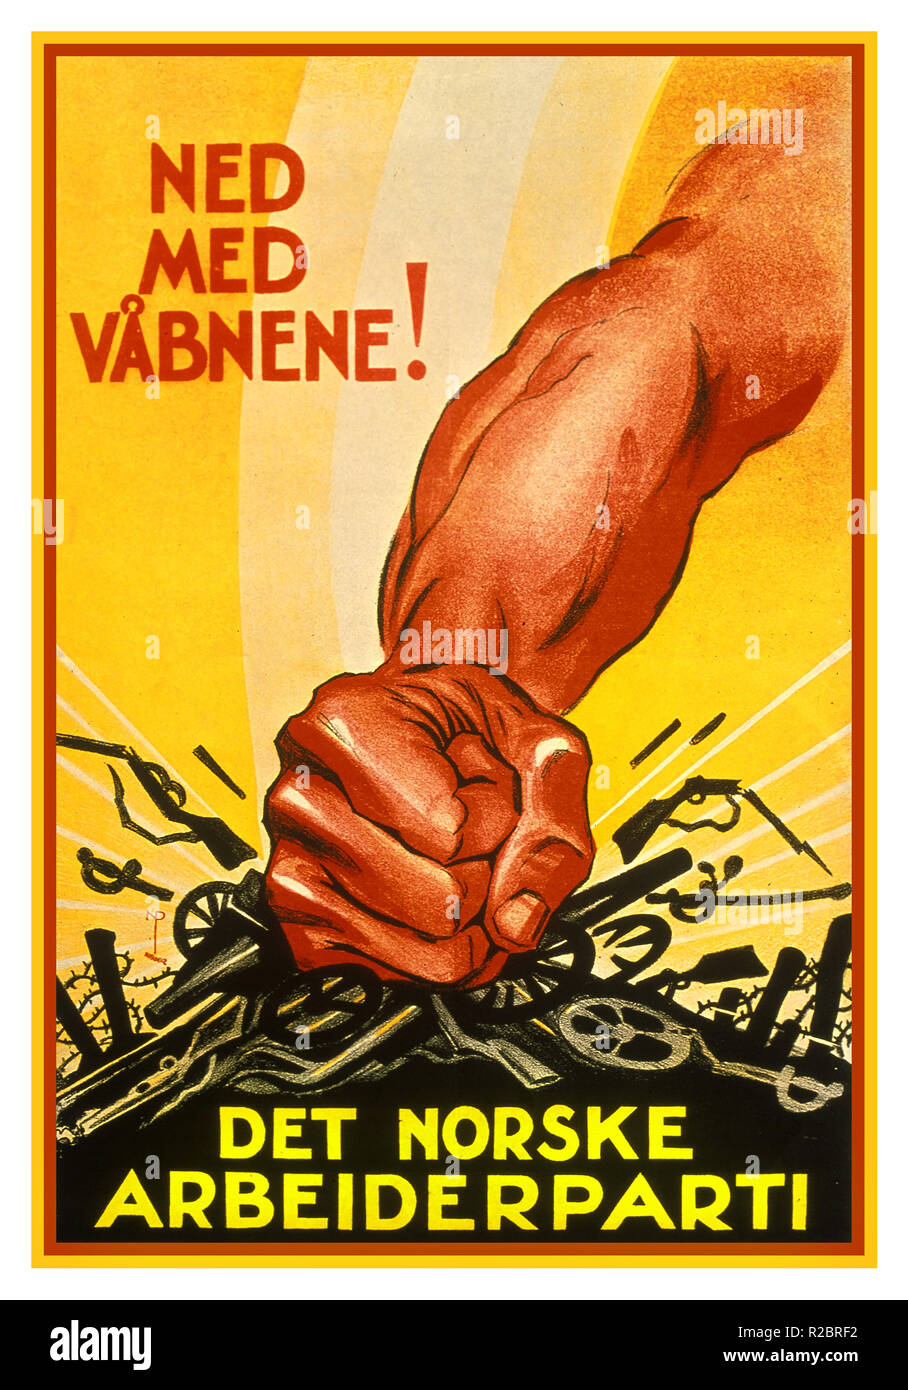 Vintage Norwegian Propaganda Poster 1930's 'Down With Arms' (NED MED VABNENE!)  Det norske Arbeiderparti 'The Norwegian Labor Party' Stock Photo